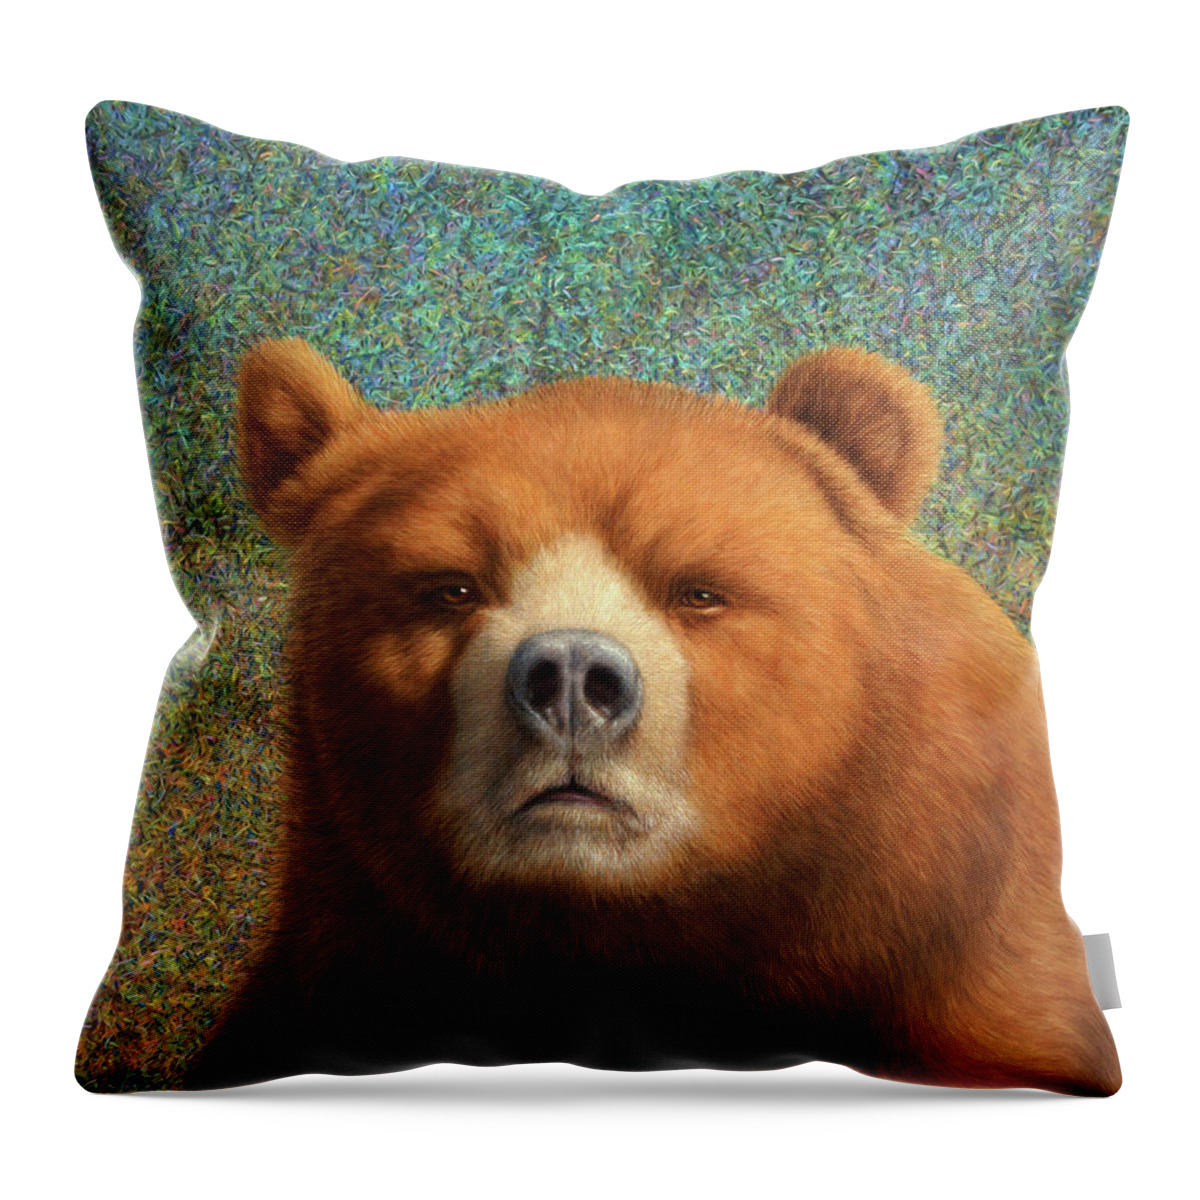 Bear Throw Pillow featuring the painting Bearish by James W Johnson